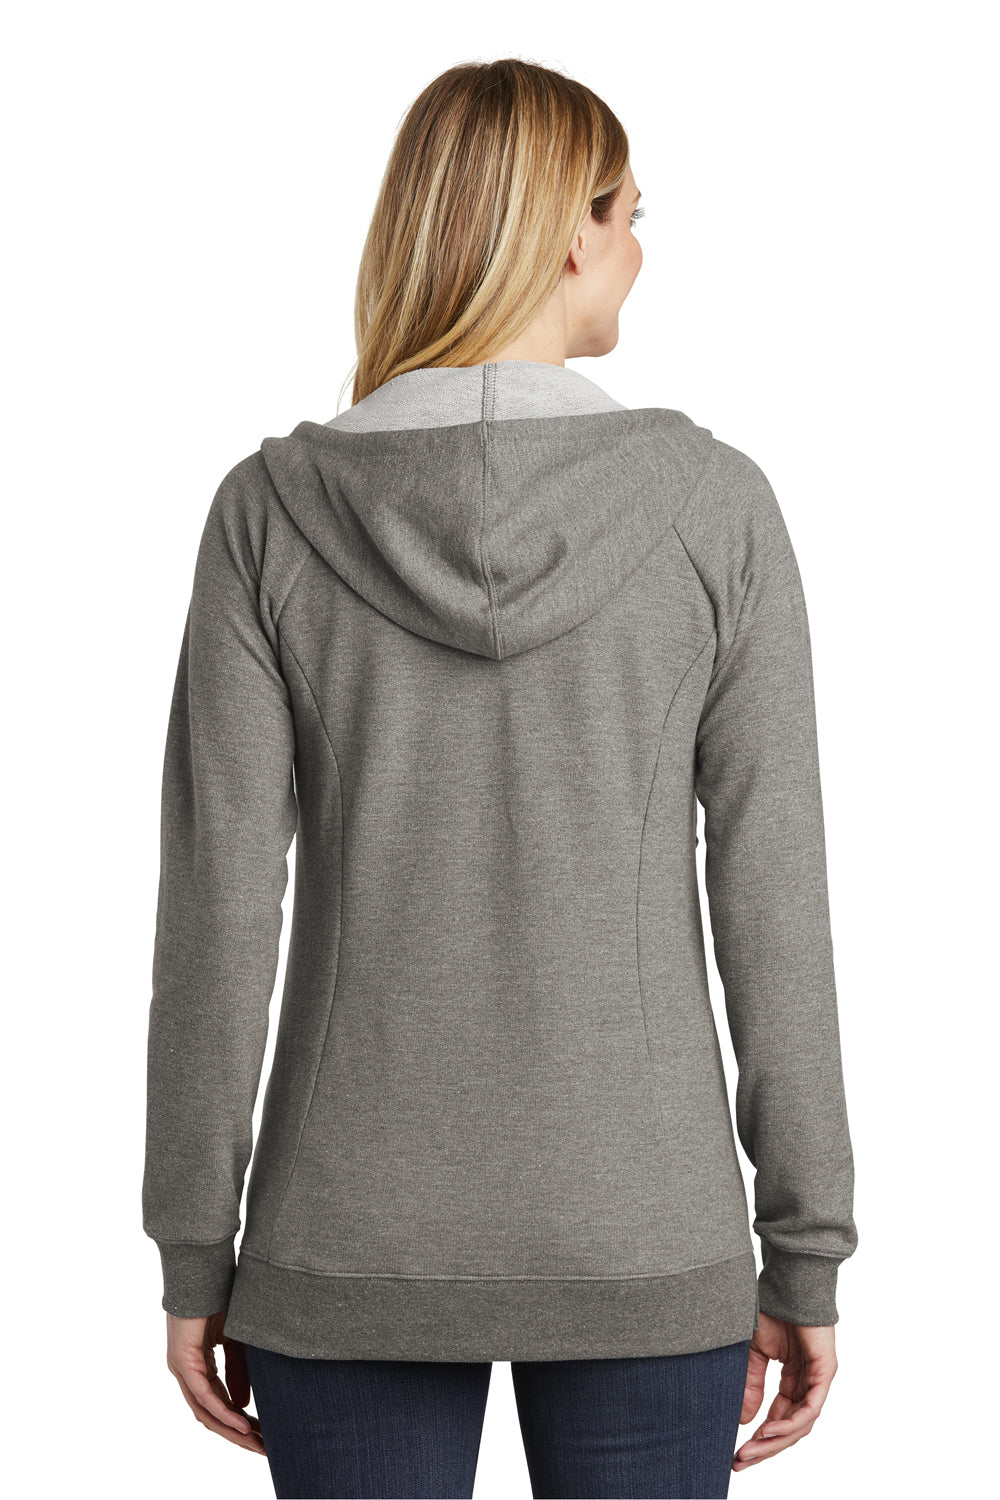 District DT456 Womens Perfect French Terry Full Zip Hooded Sweatshirt Hoodie Grey Back